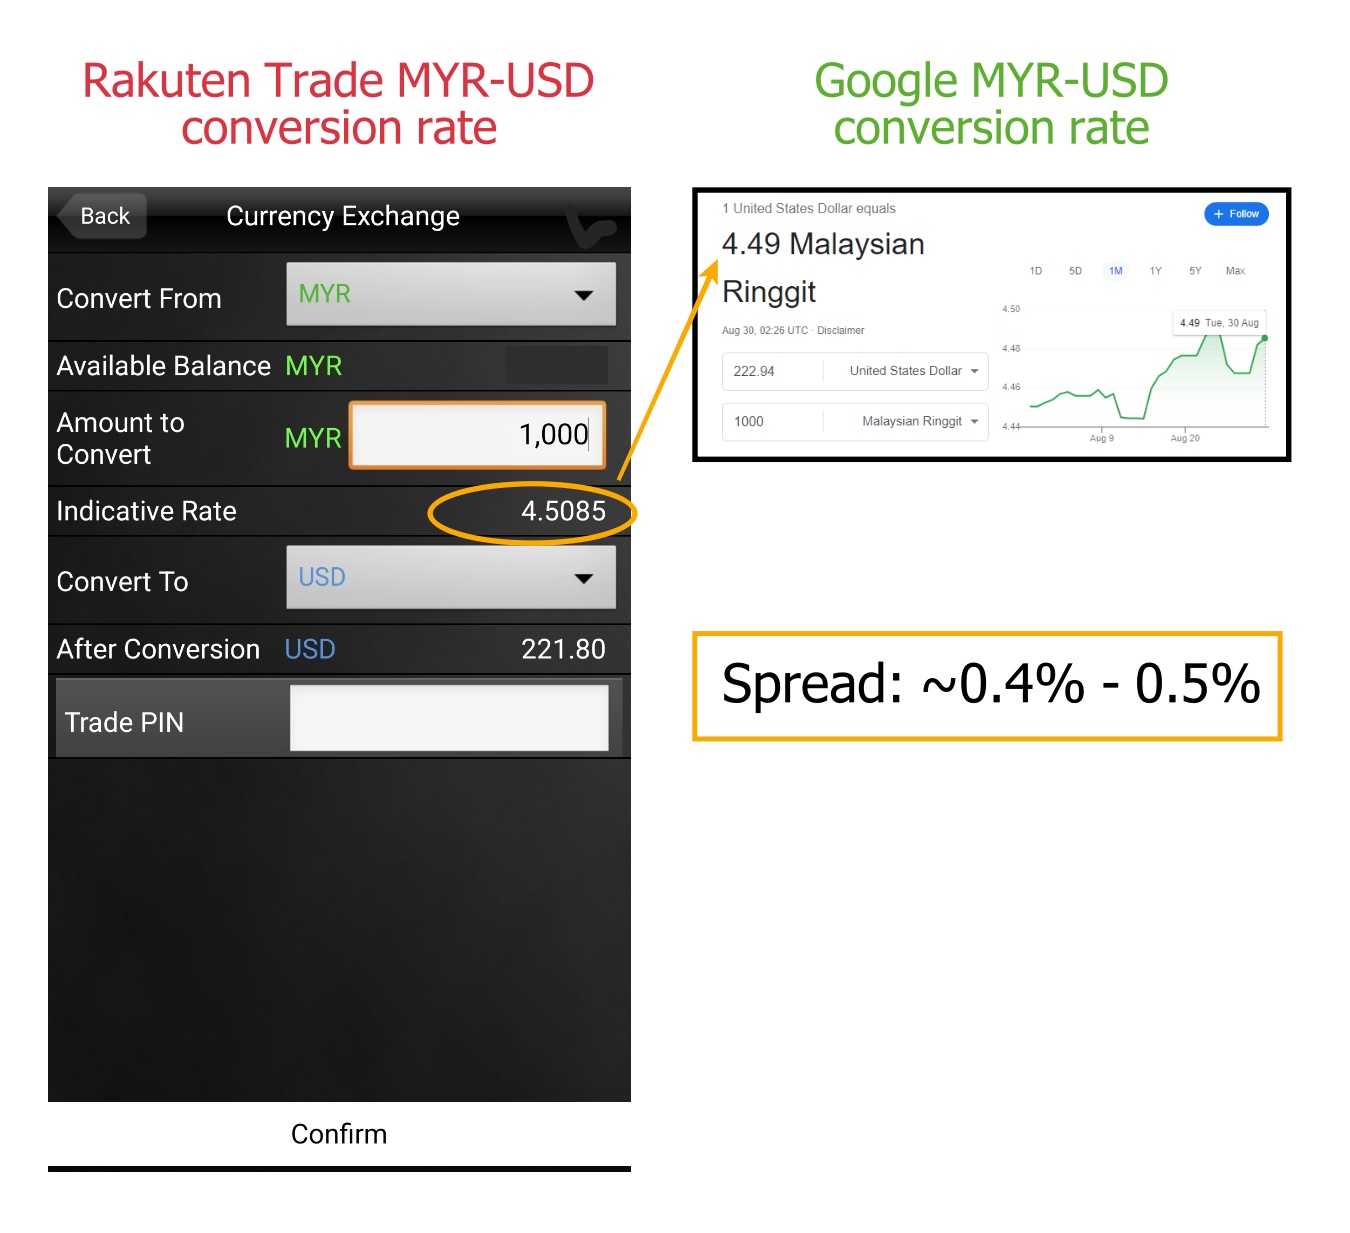 Rakuten Trade MYR to USD currency conversion rate